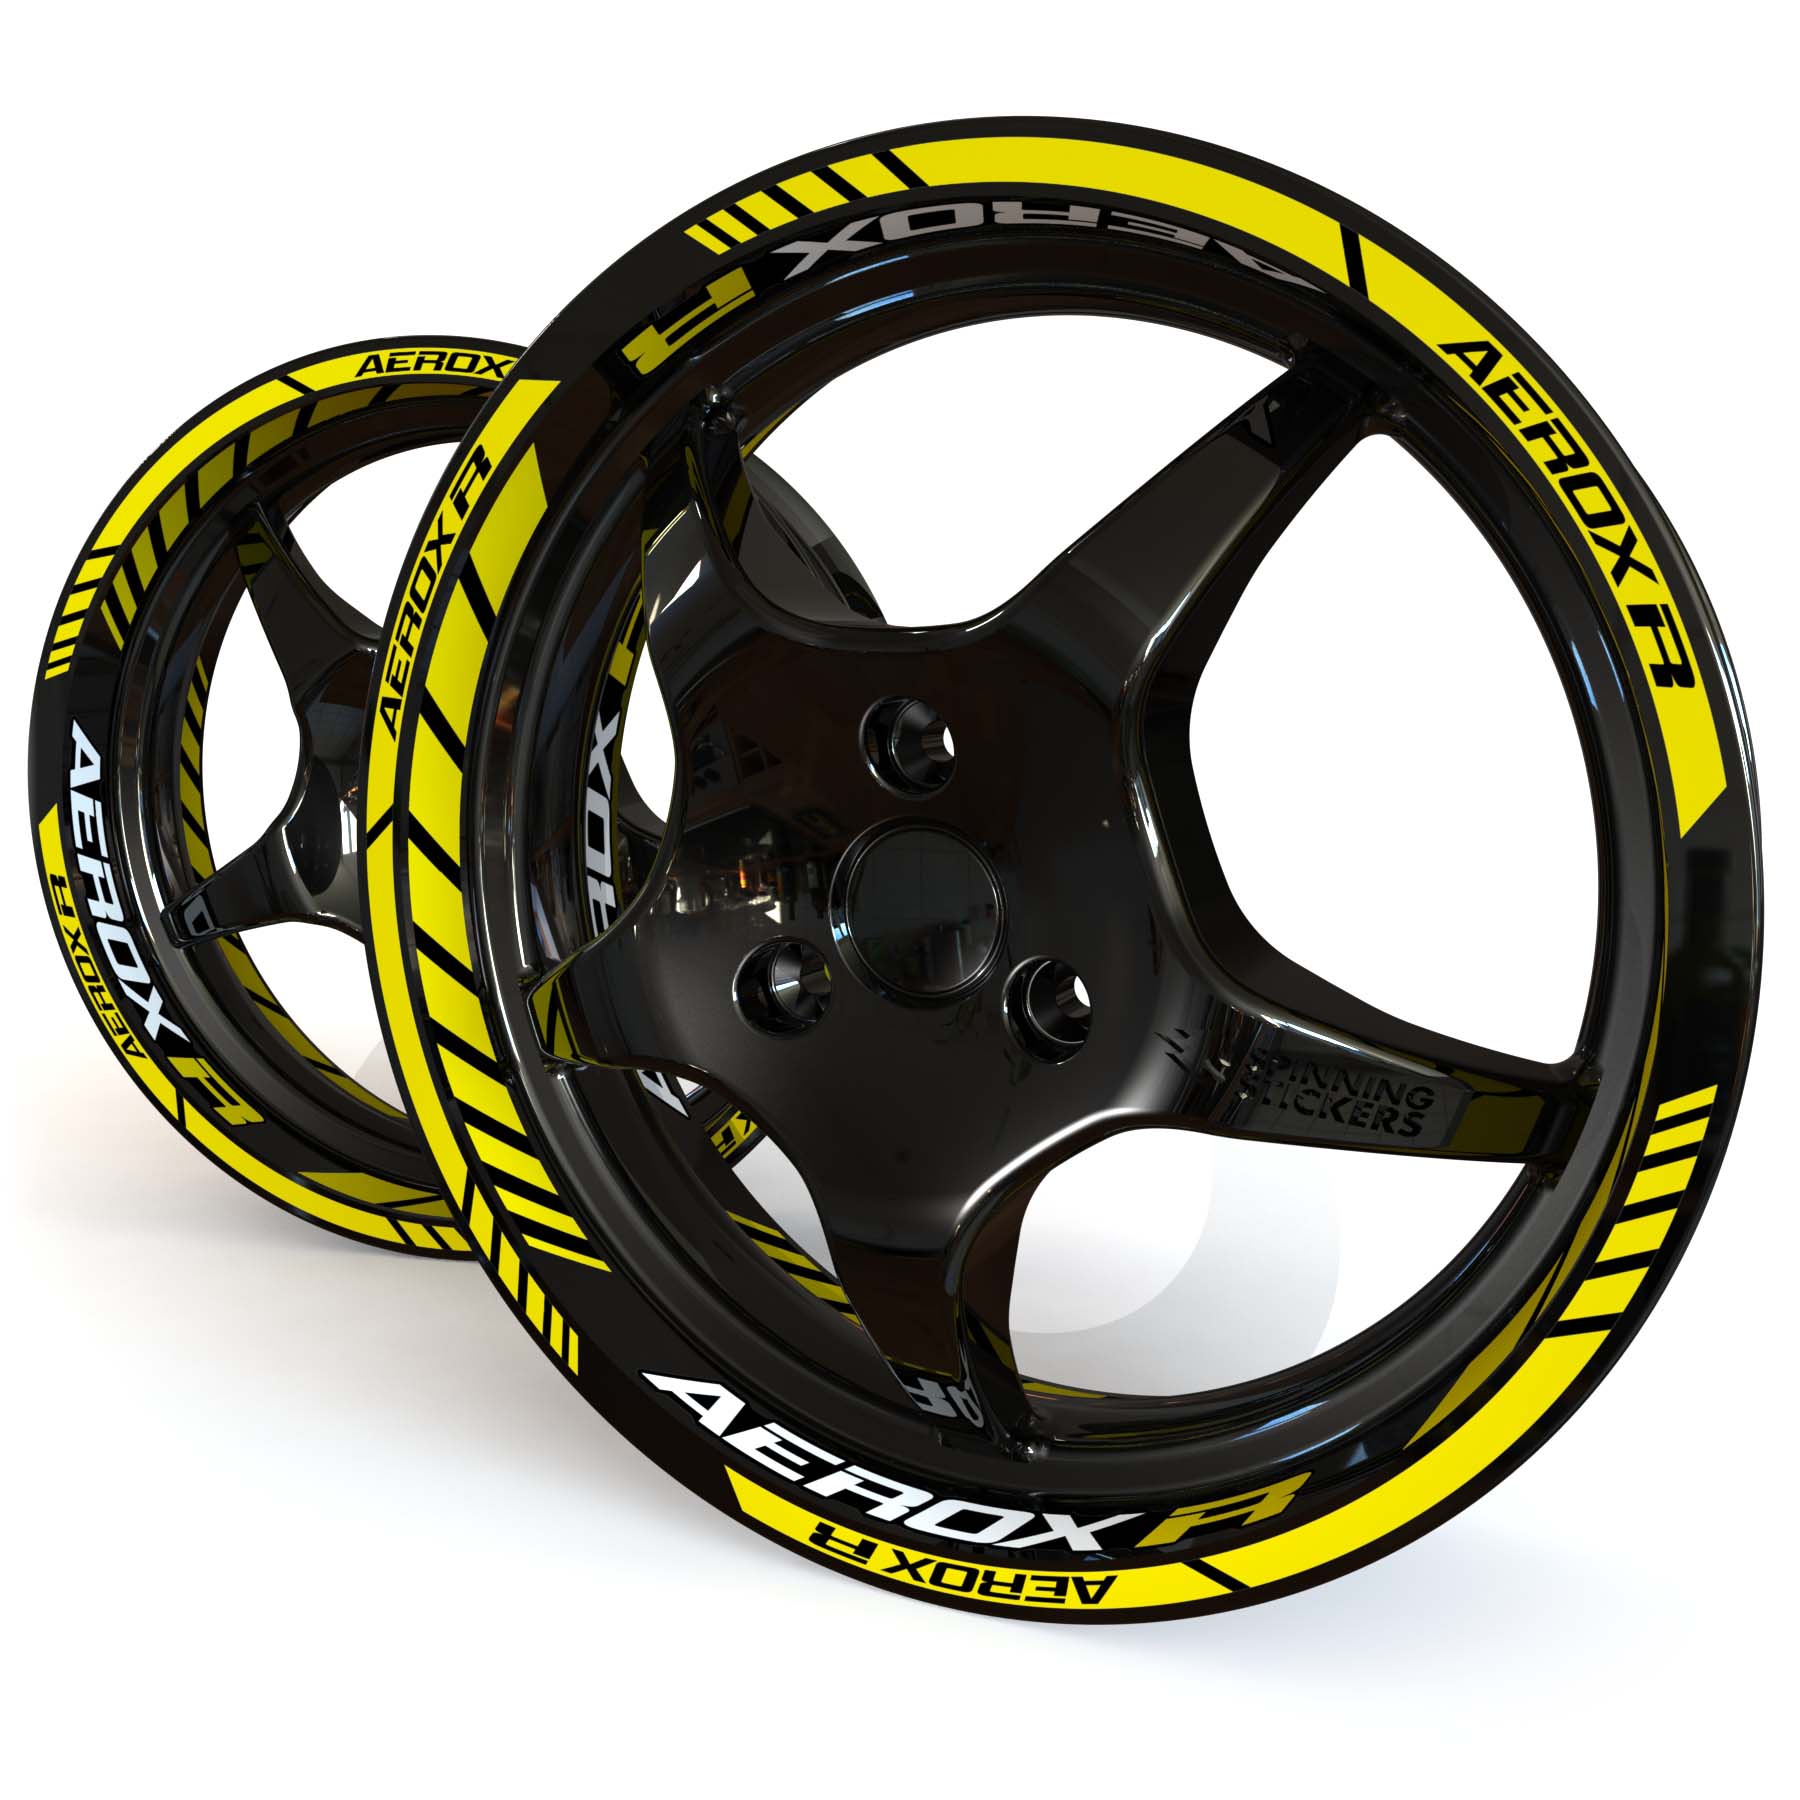 Yellow and white Yamaha Aerox R wheel stickers on a black 12 inch moped rim